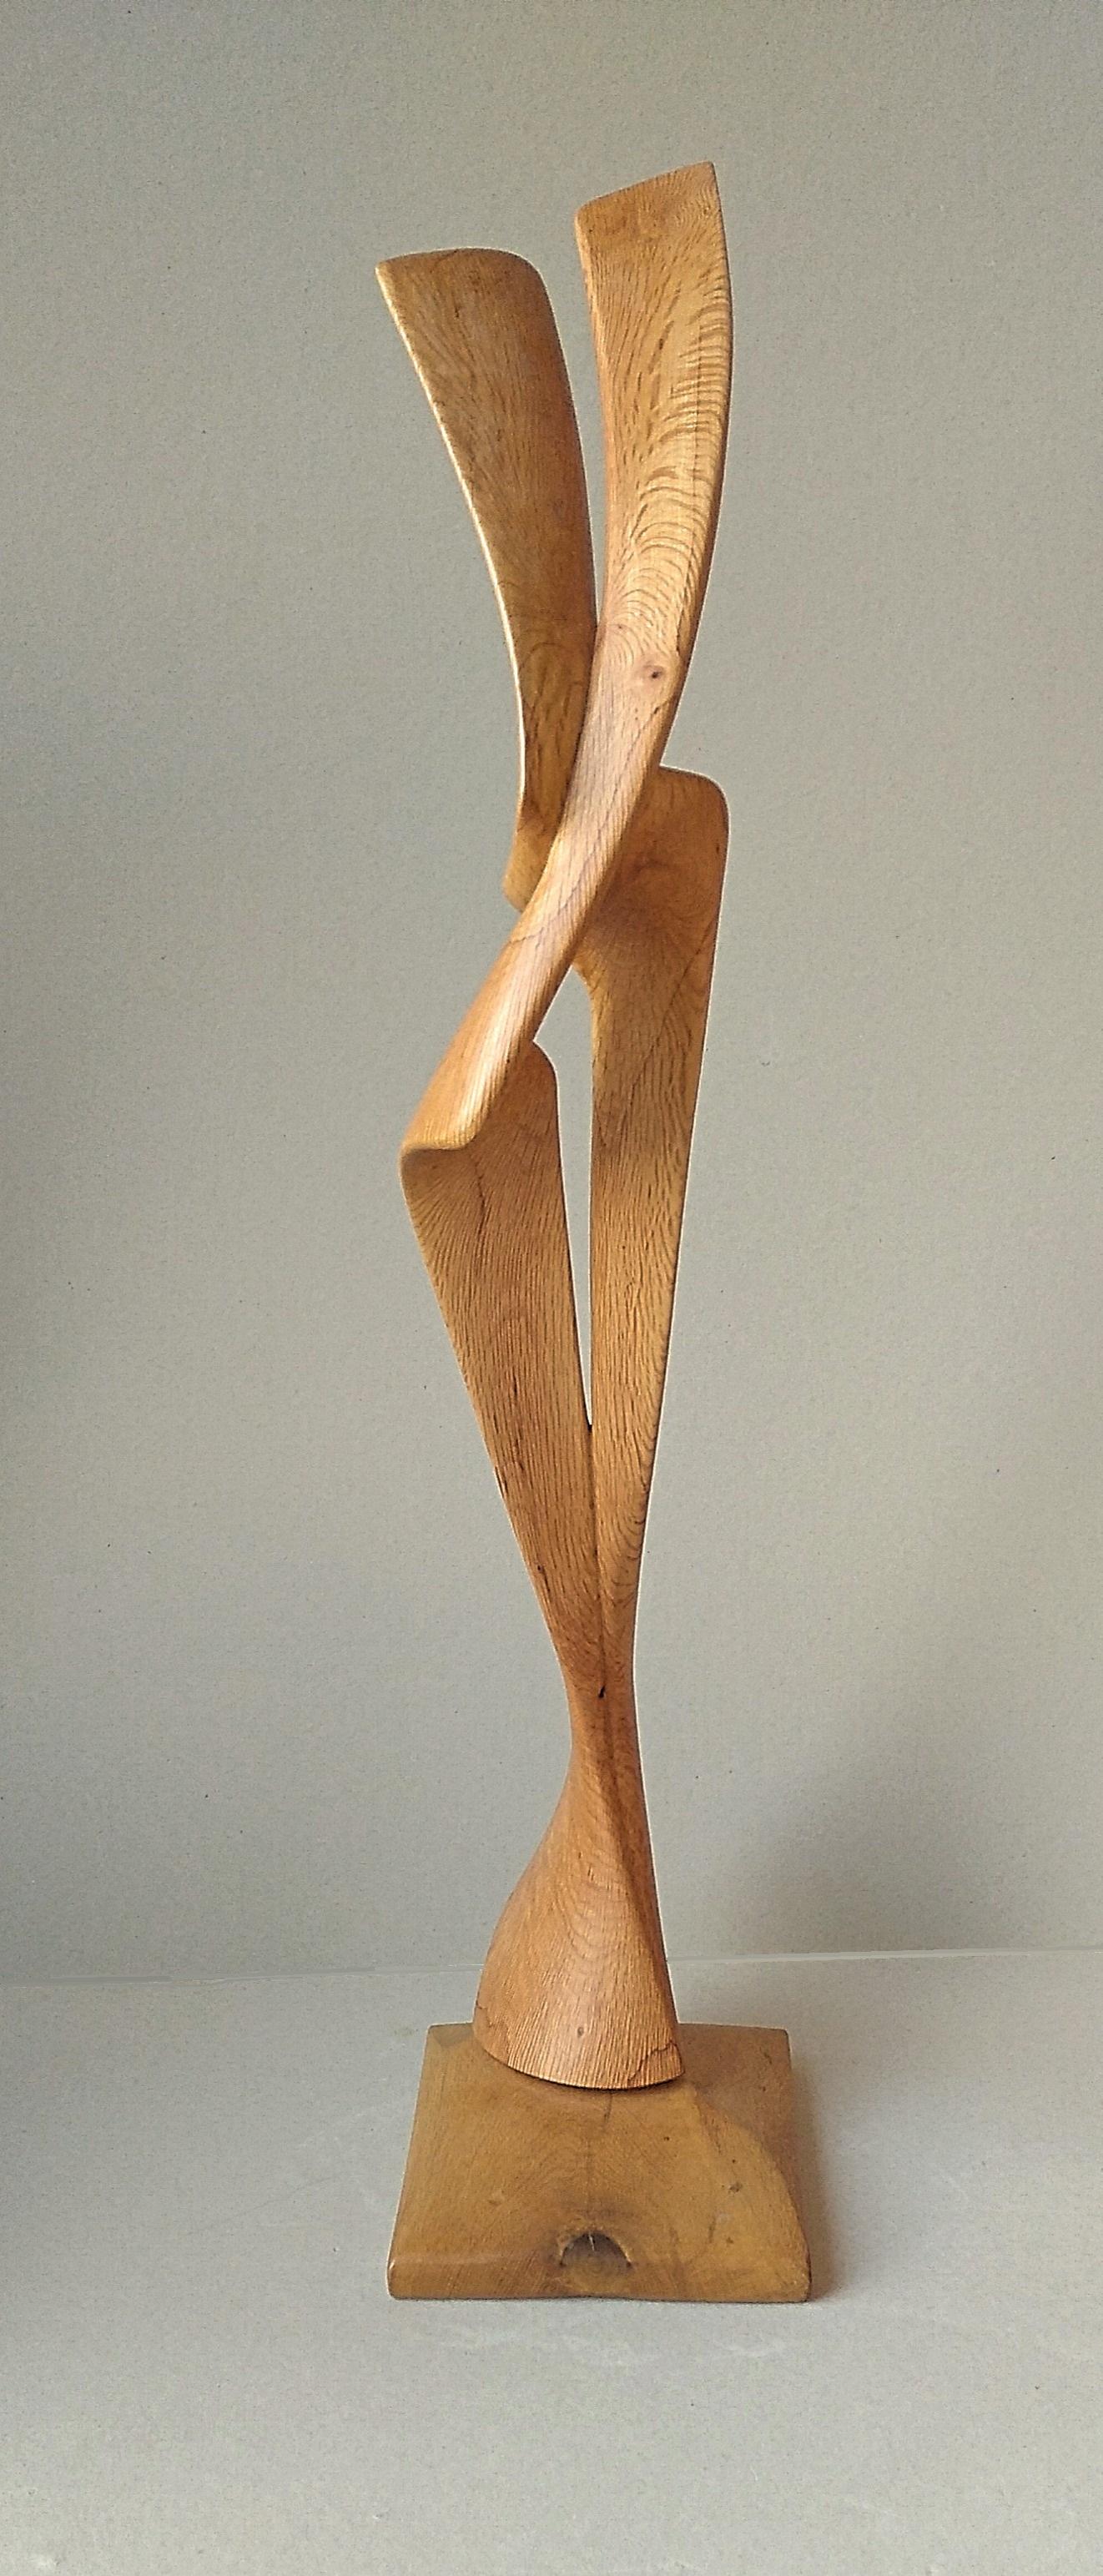 wood sculpture abstract